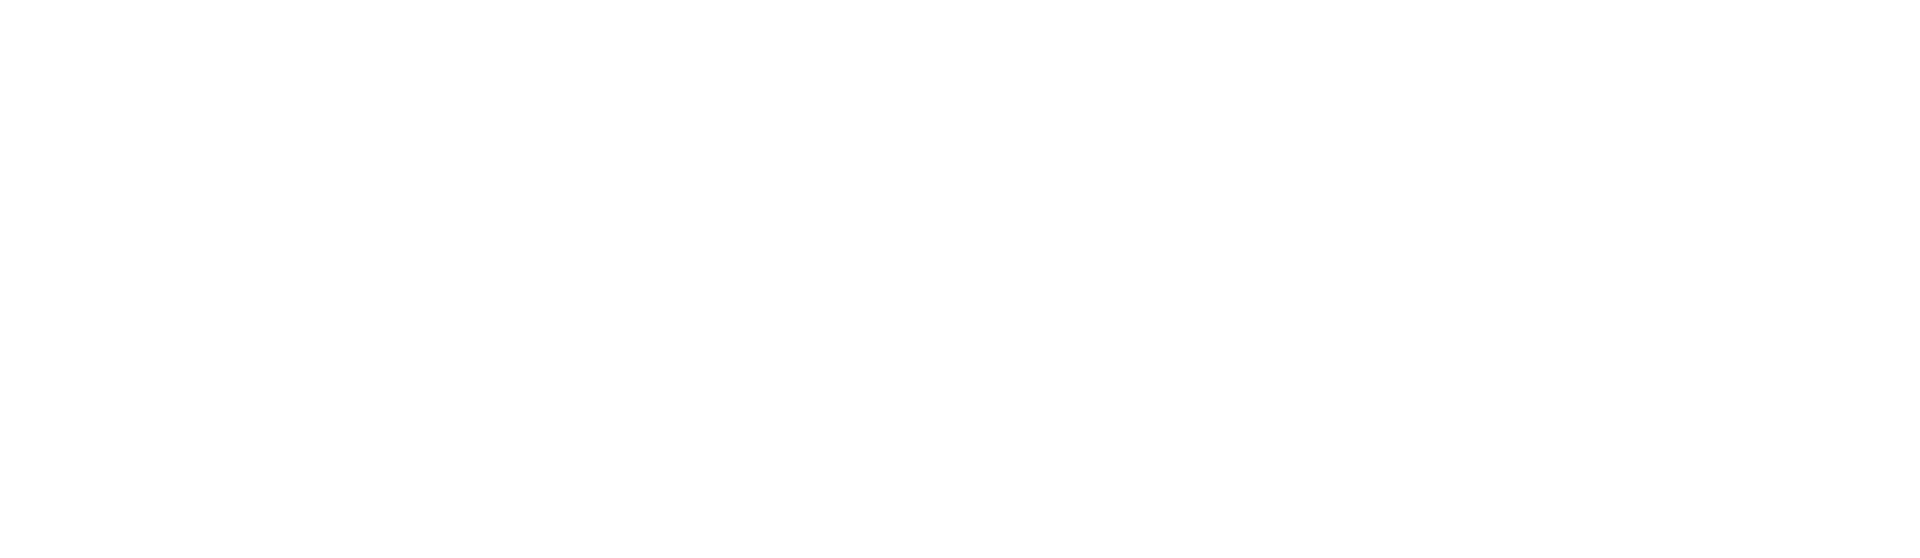 Fermanagh Omagh District Council Logo